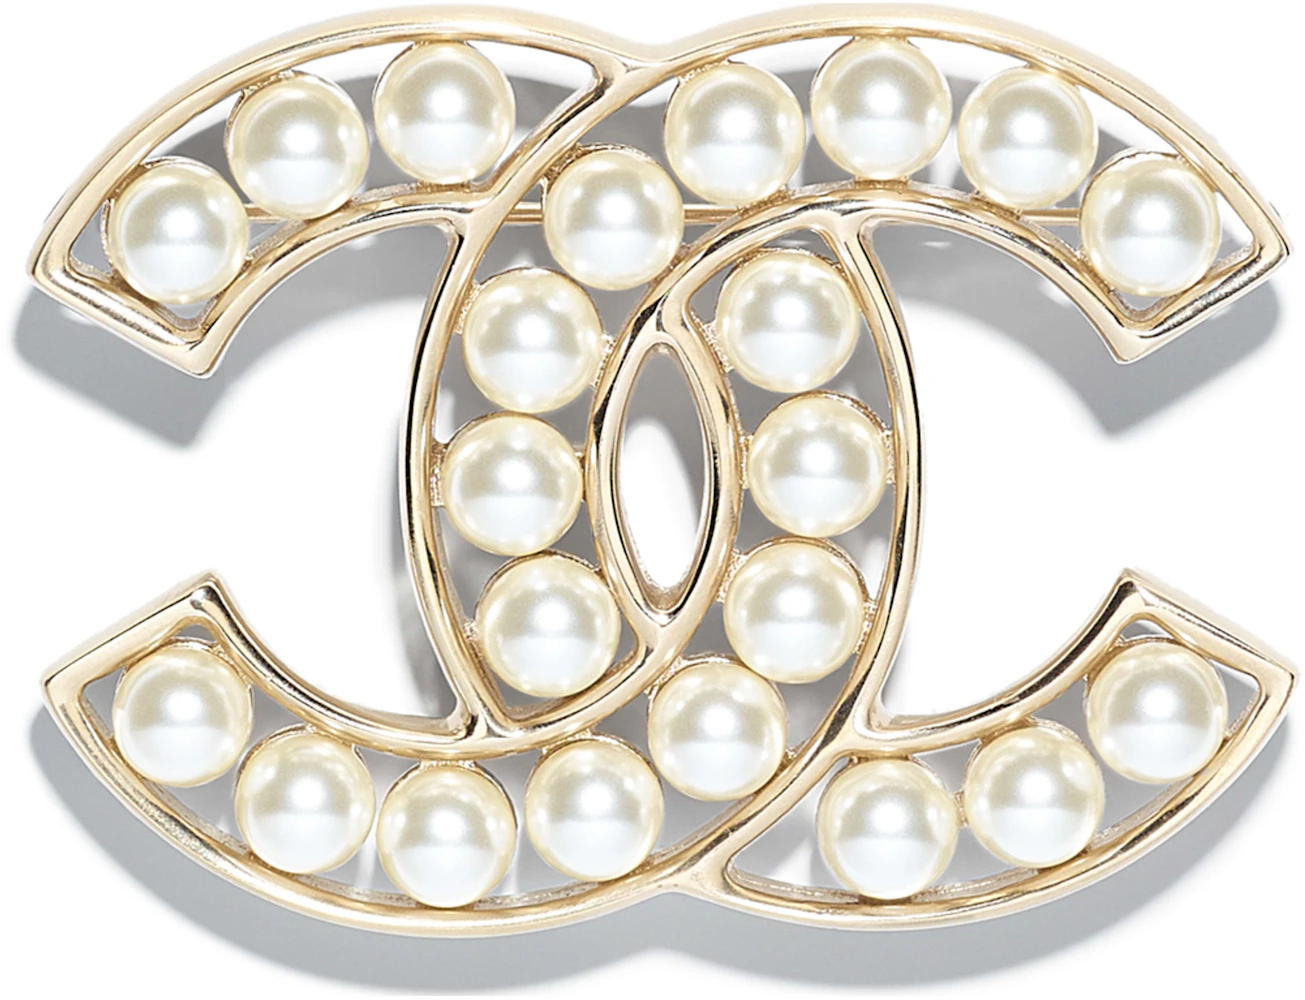 CHANEL, Jewelry, Authentic Chanel Cc Pearl Brooch In Gold Metal Golden Classic  Brooch Women